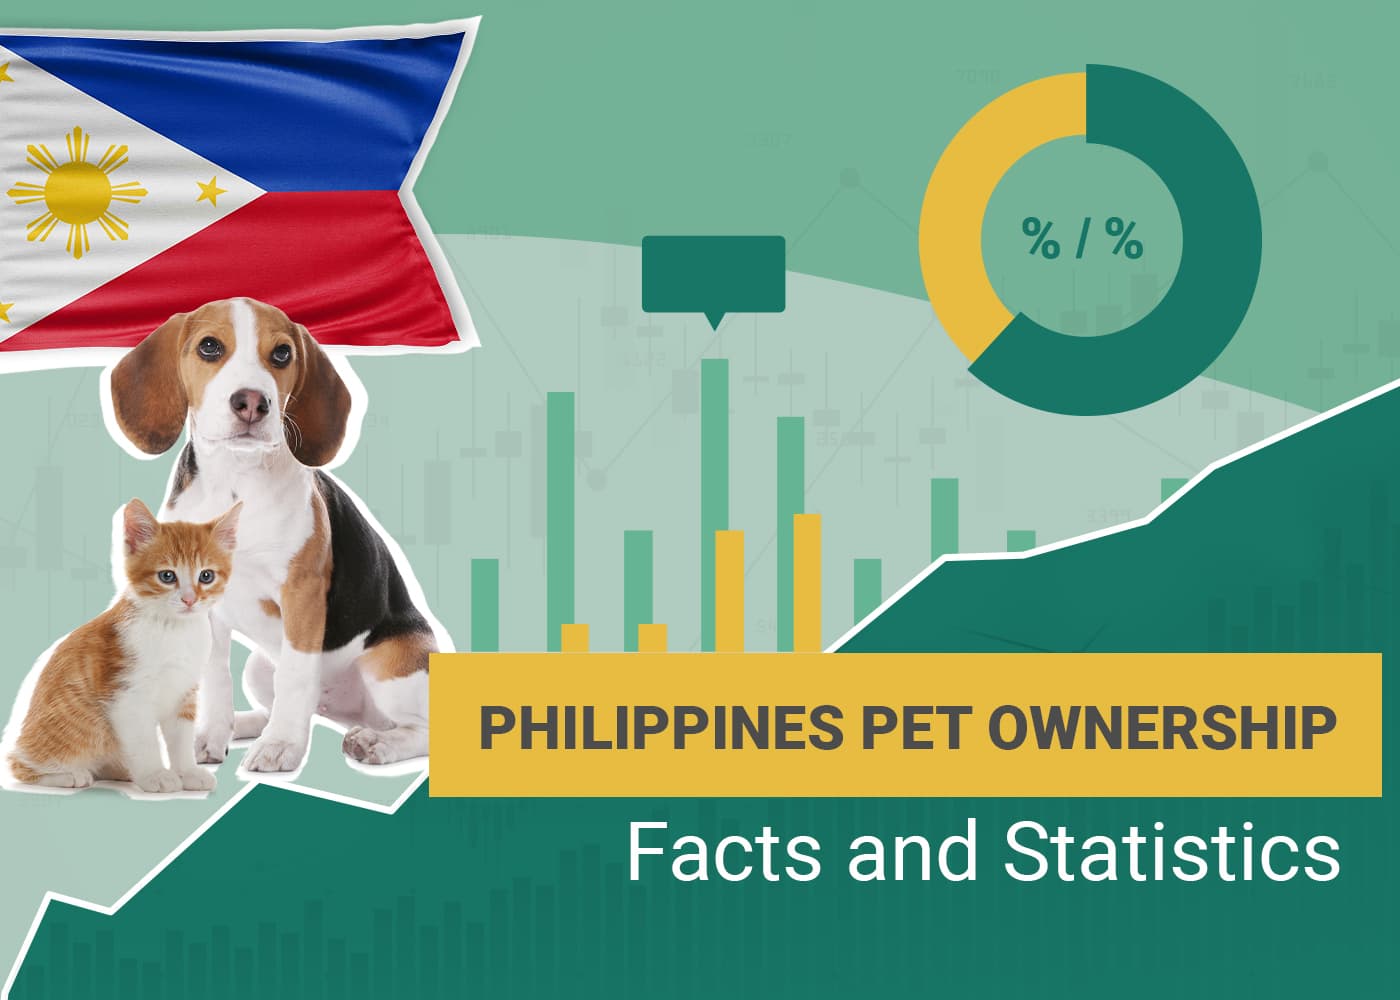 Philippines pet owner facts and statistics